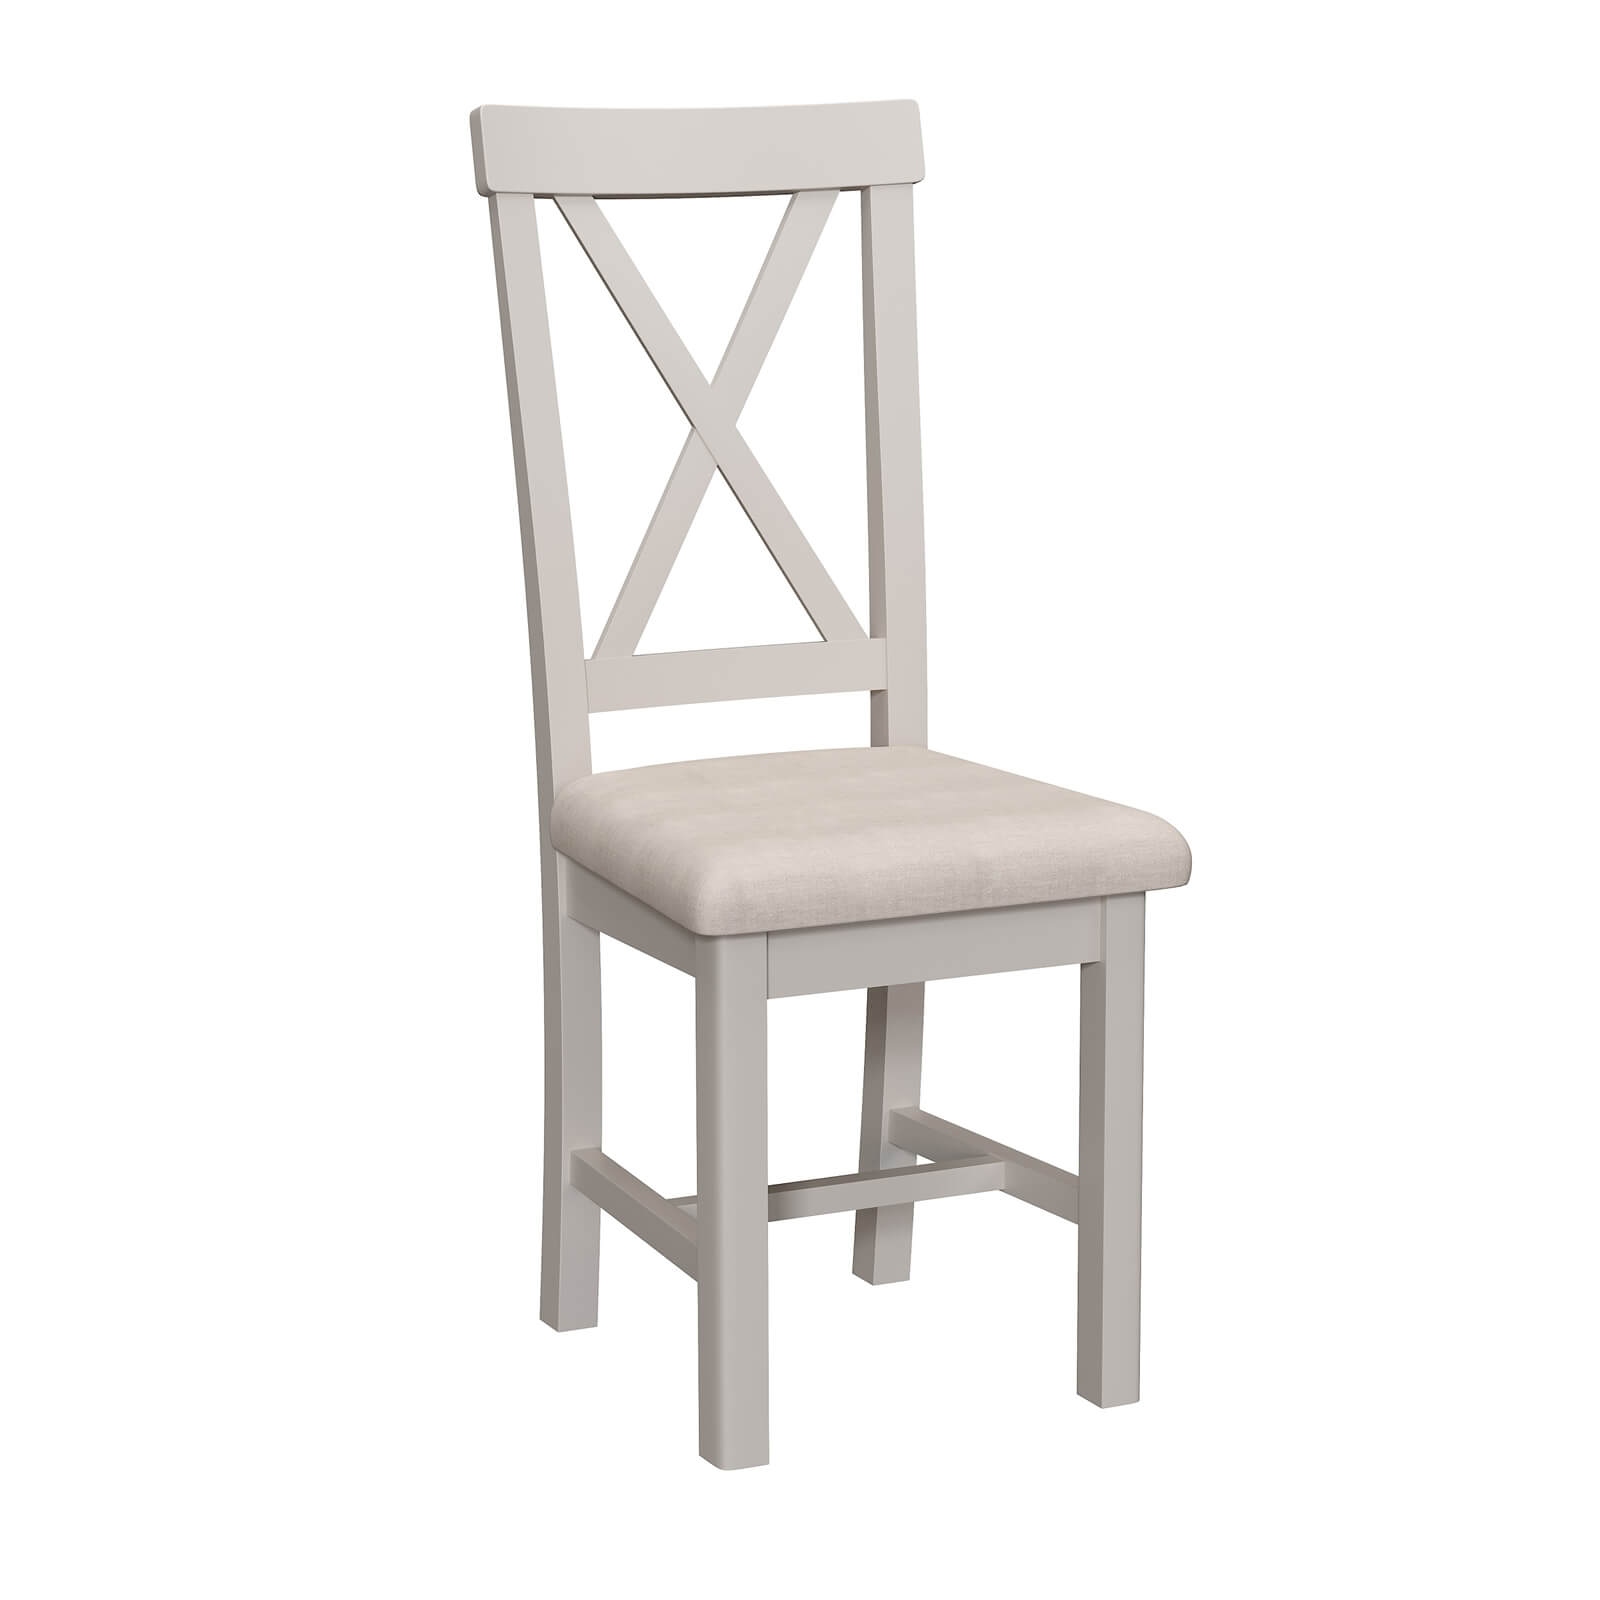 Padstow Upholstered Cross Back Dining Chair - Set of 2 - Truffle